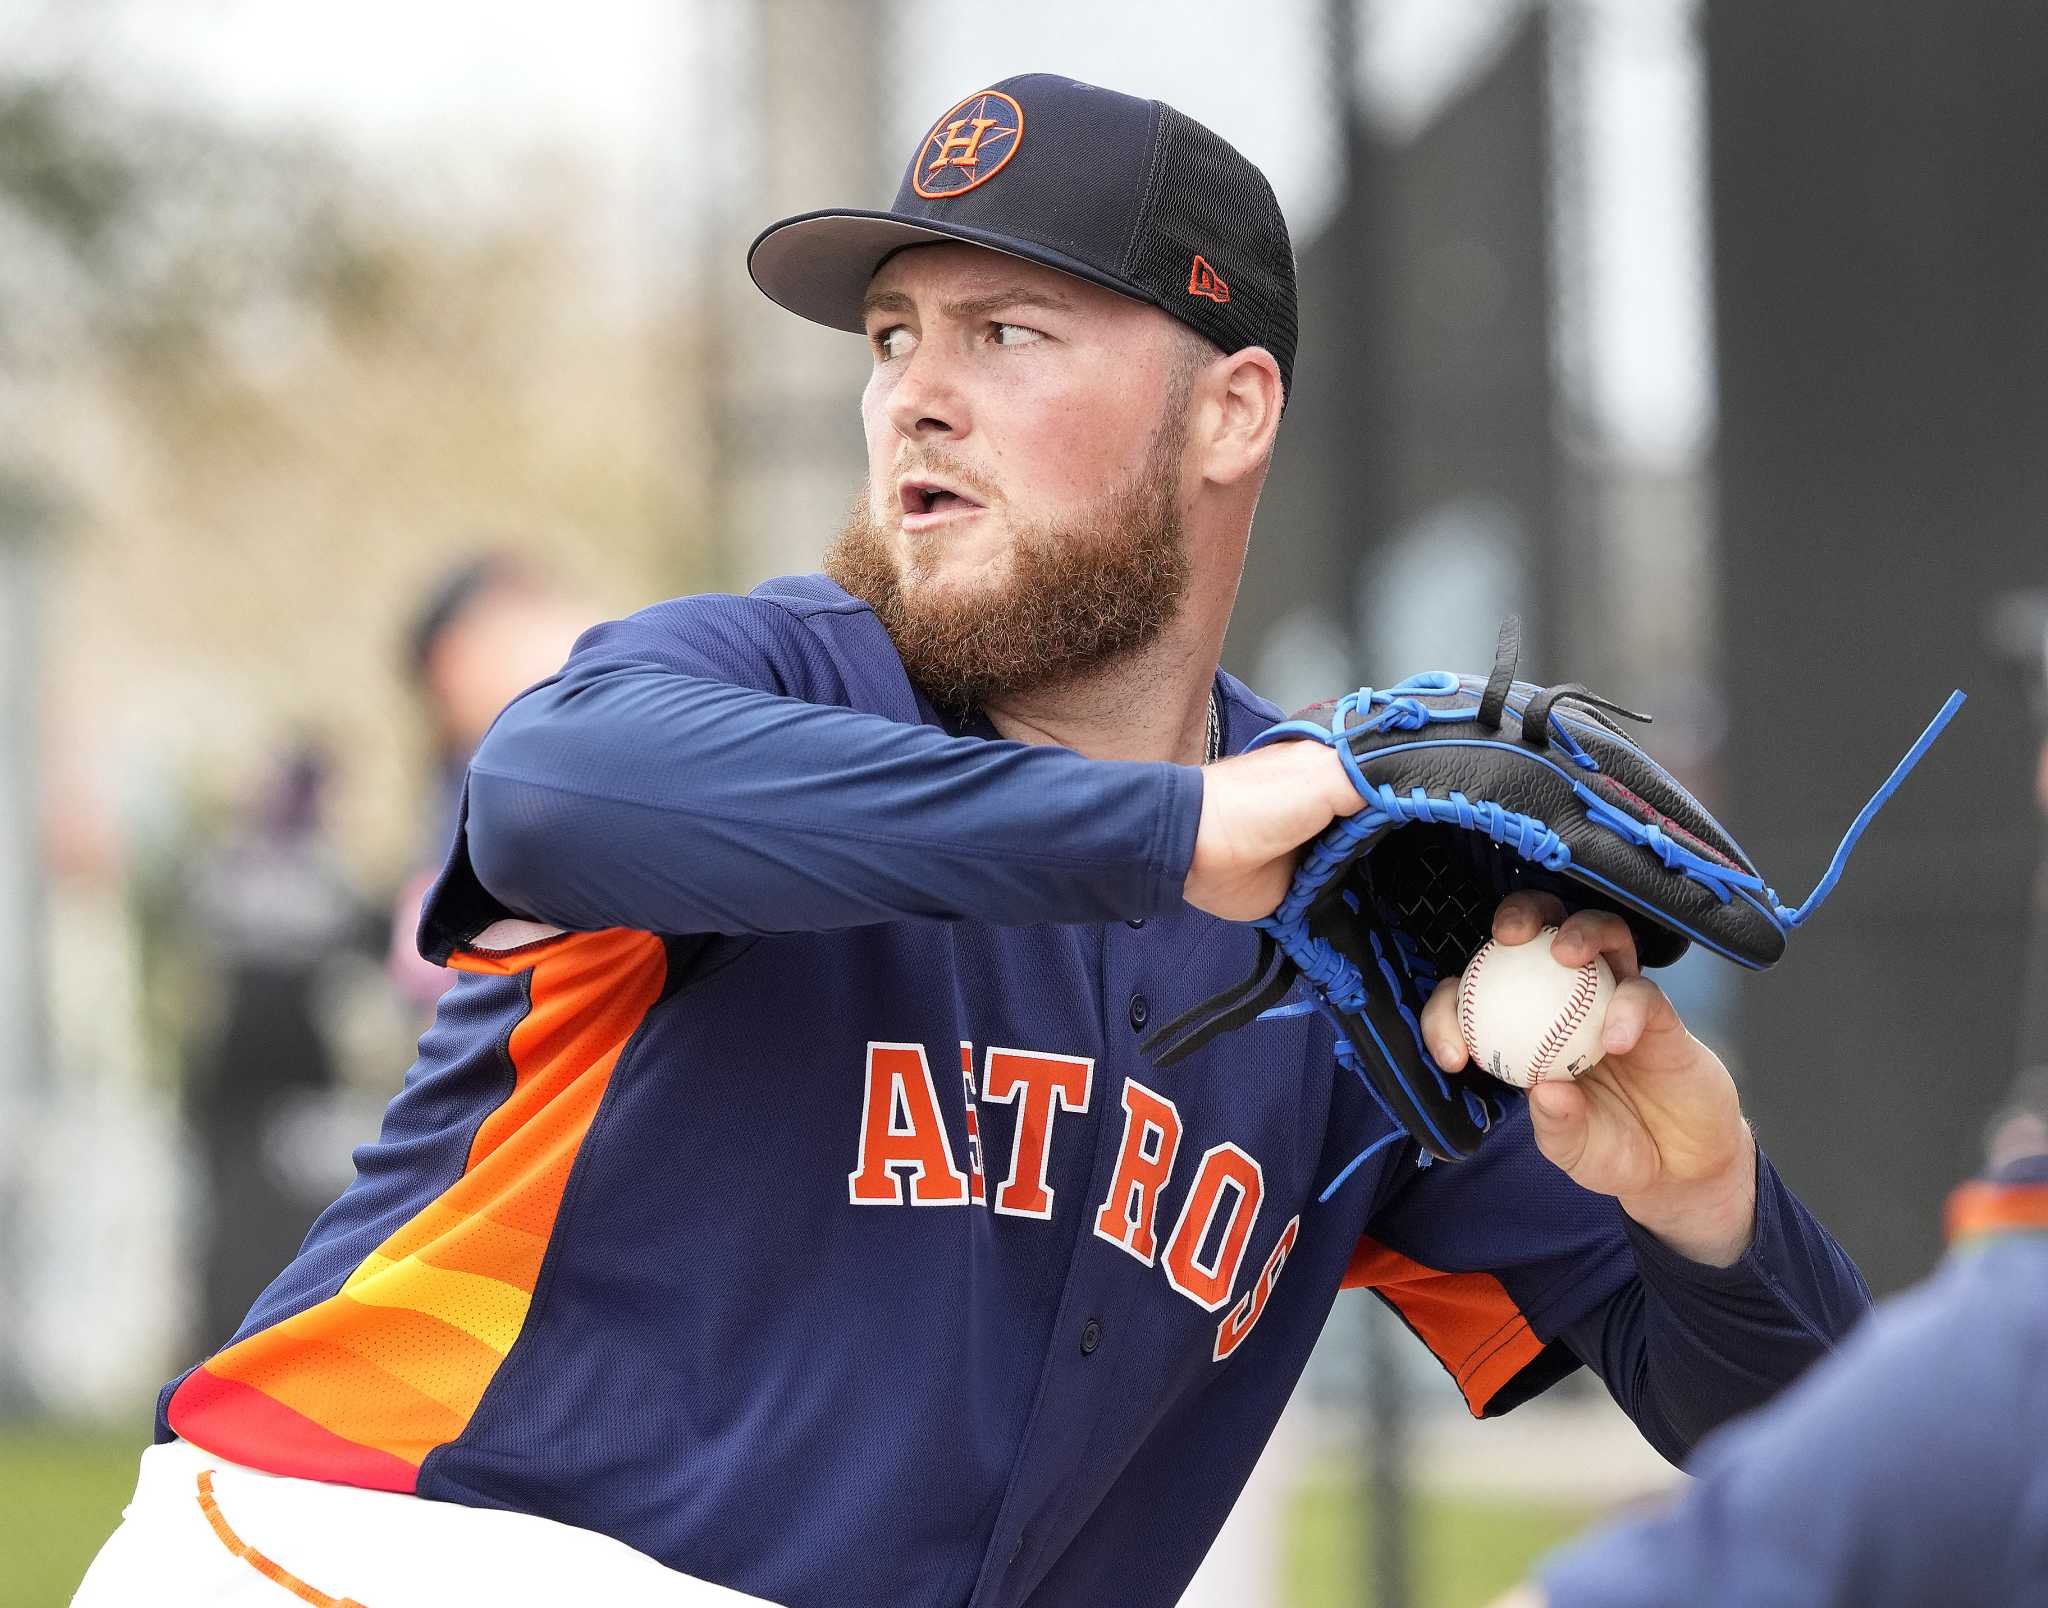 Astros Players Are Getting Hit by Pitches in Spring Training